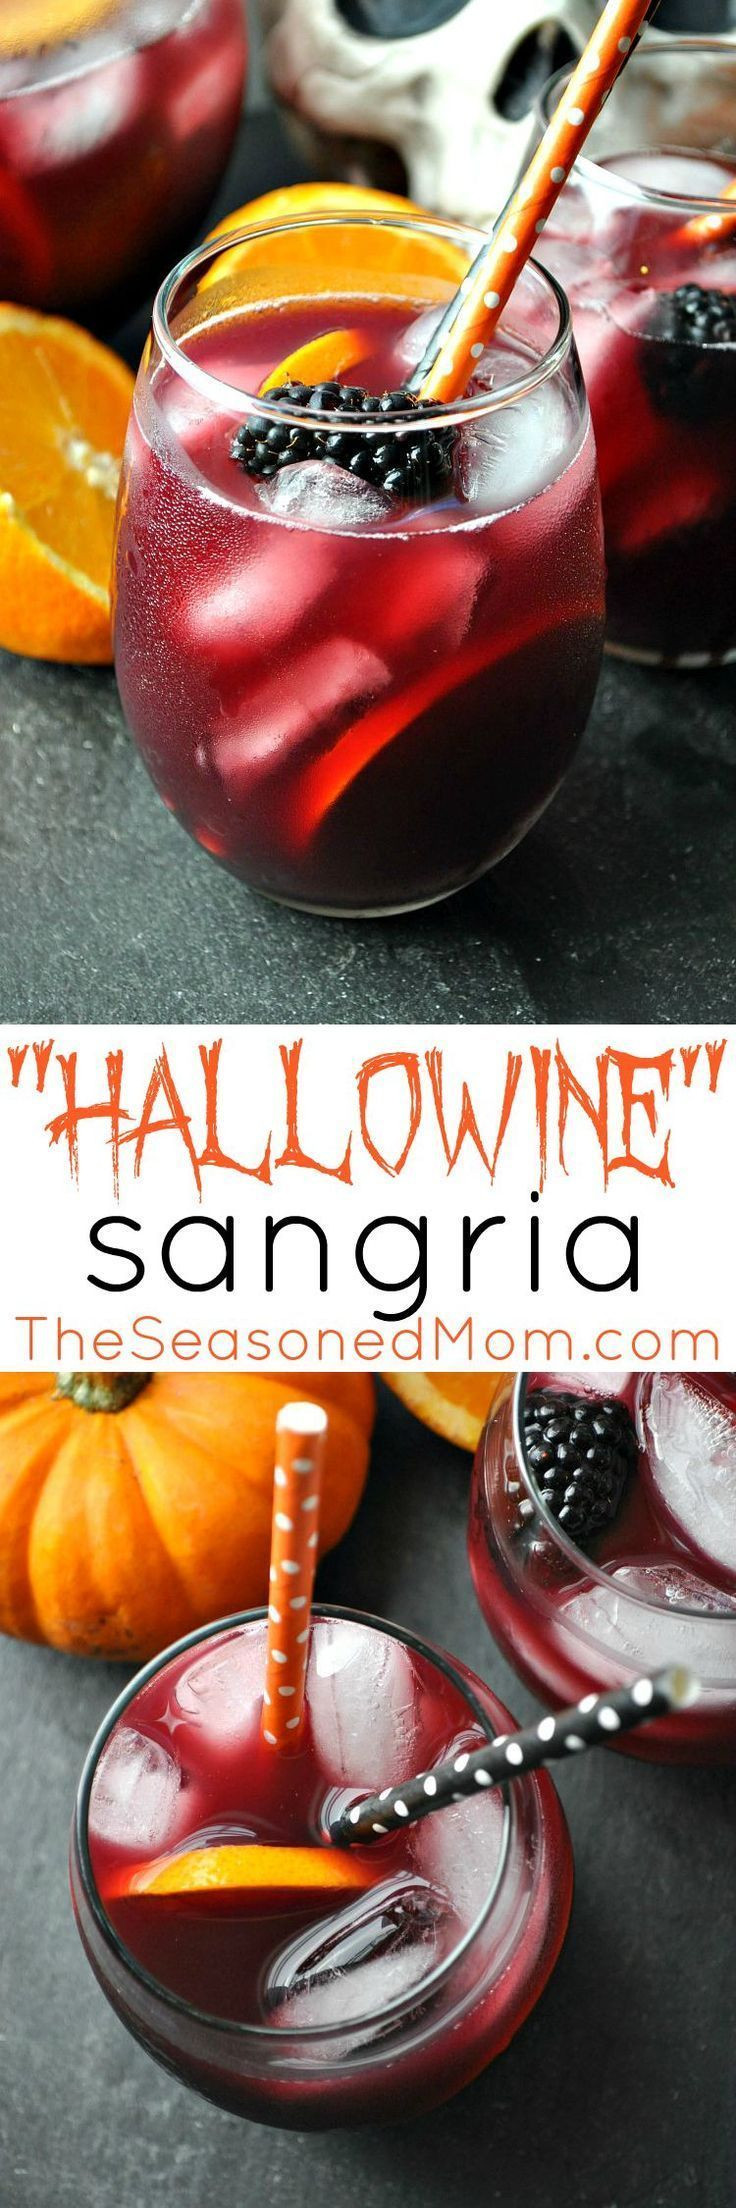 Easy Halloween Party Food Ideas For Adults
 "Hallowine" Sangria Recipe